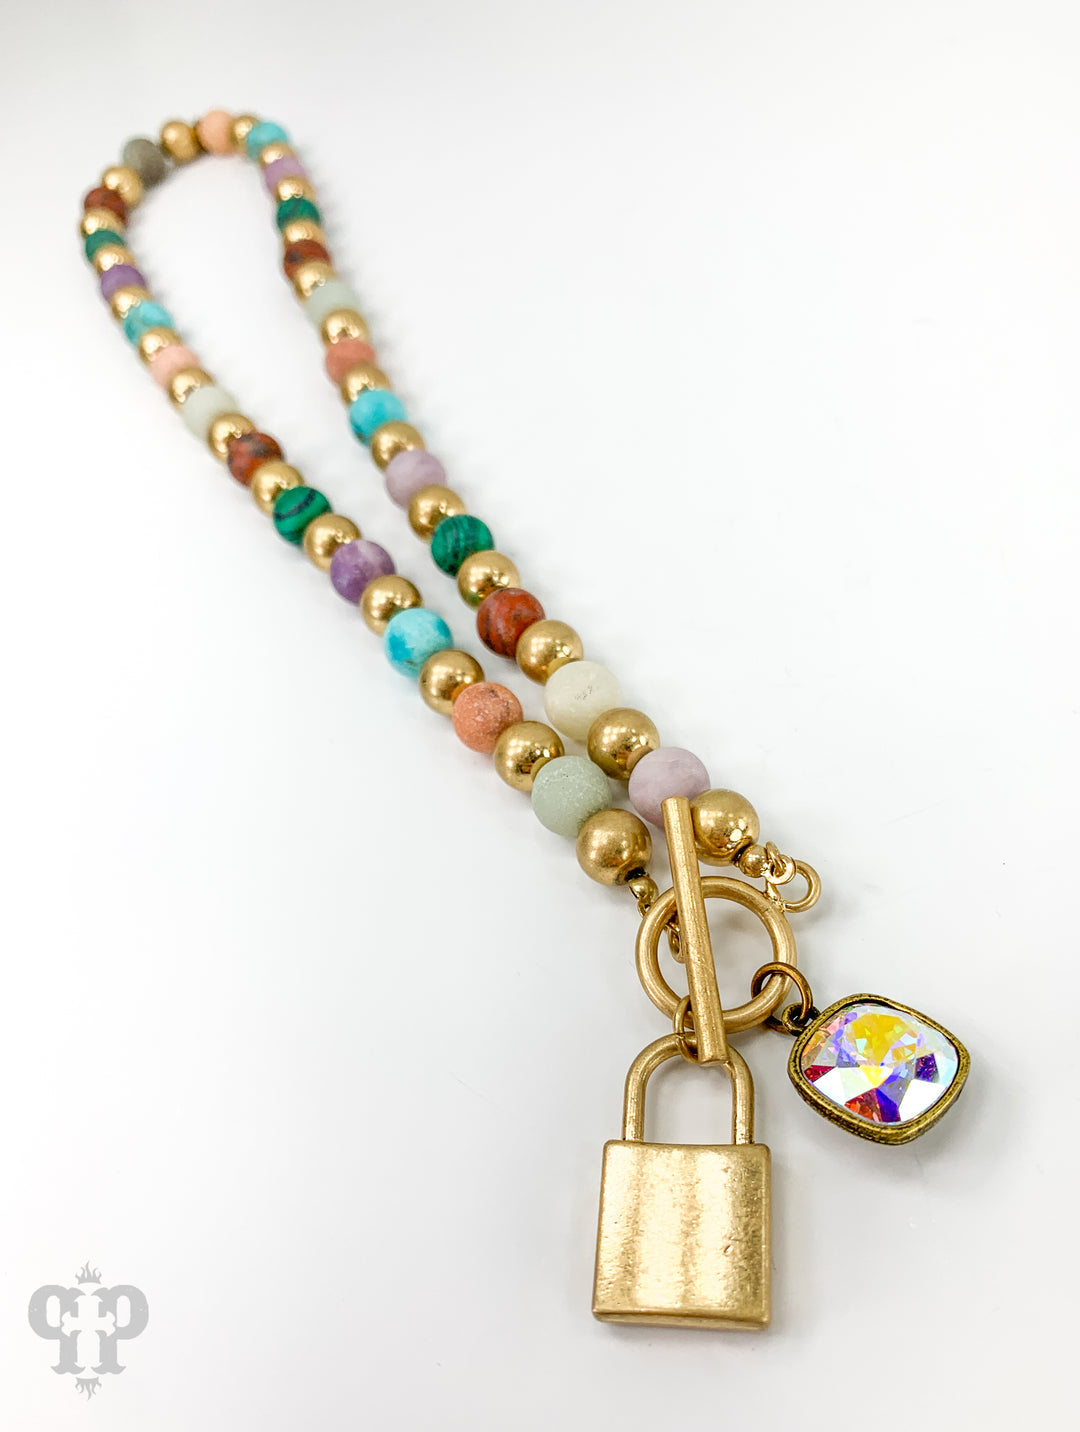 Stone Beaded Necklace With Gold Lock Charm